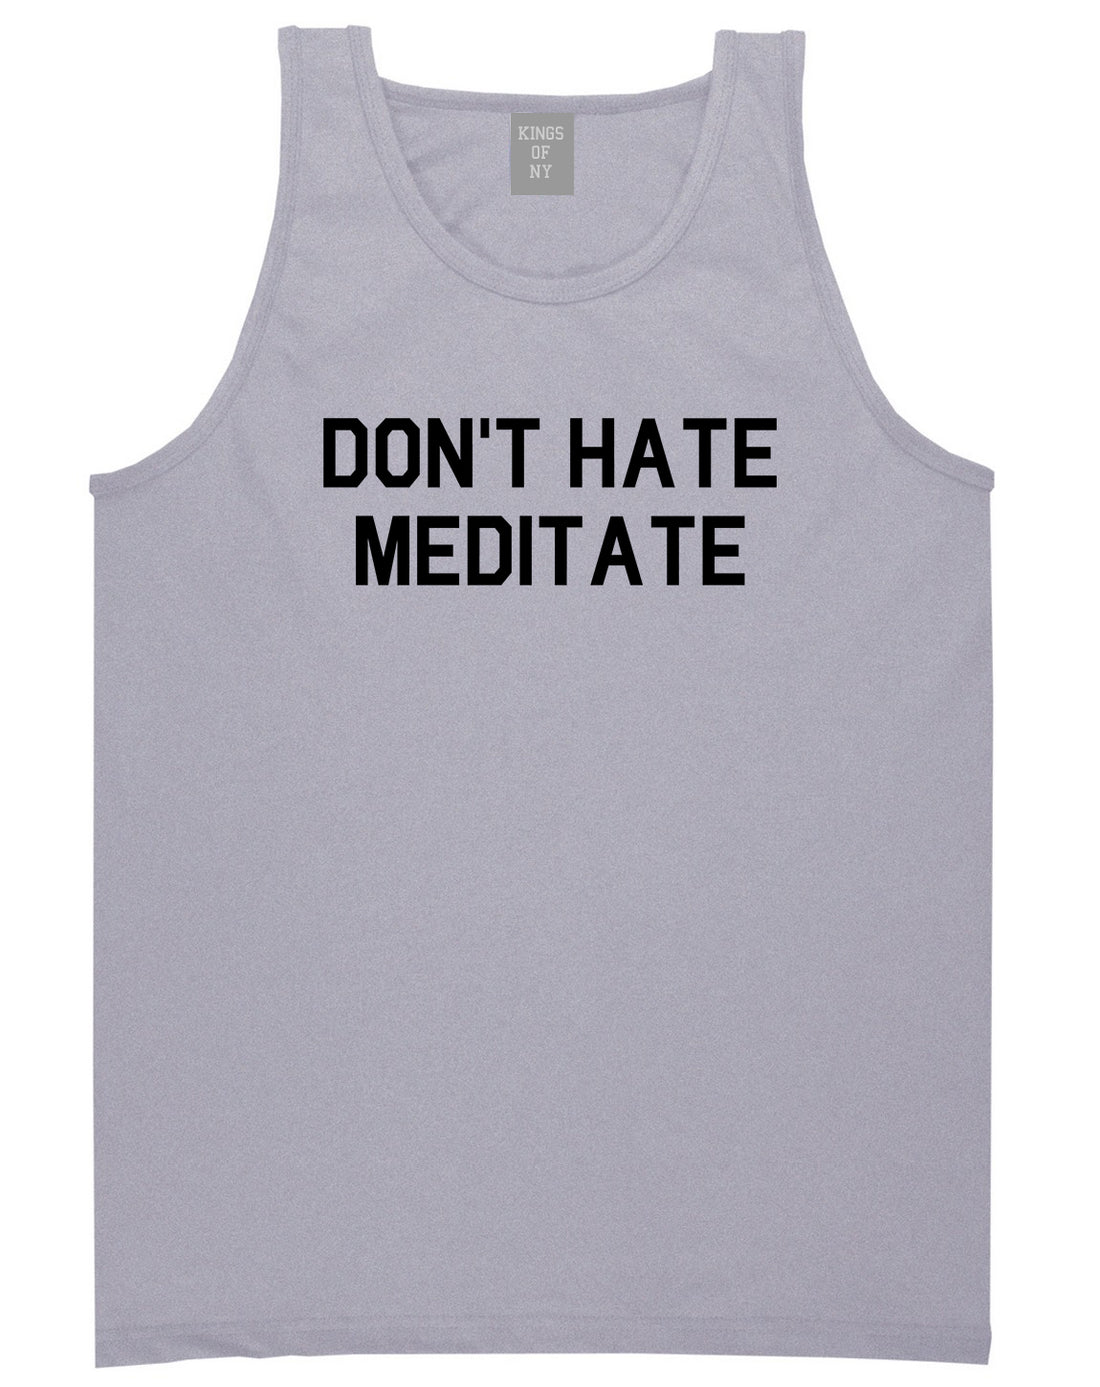 Dont_Hate_Meditate Mens Grey Tank Top Shirt by Kings Of NY